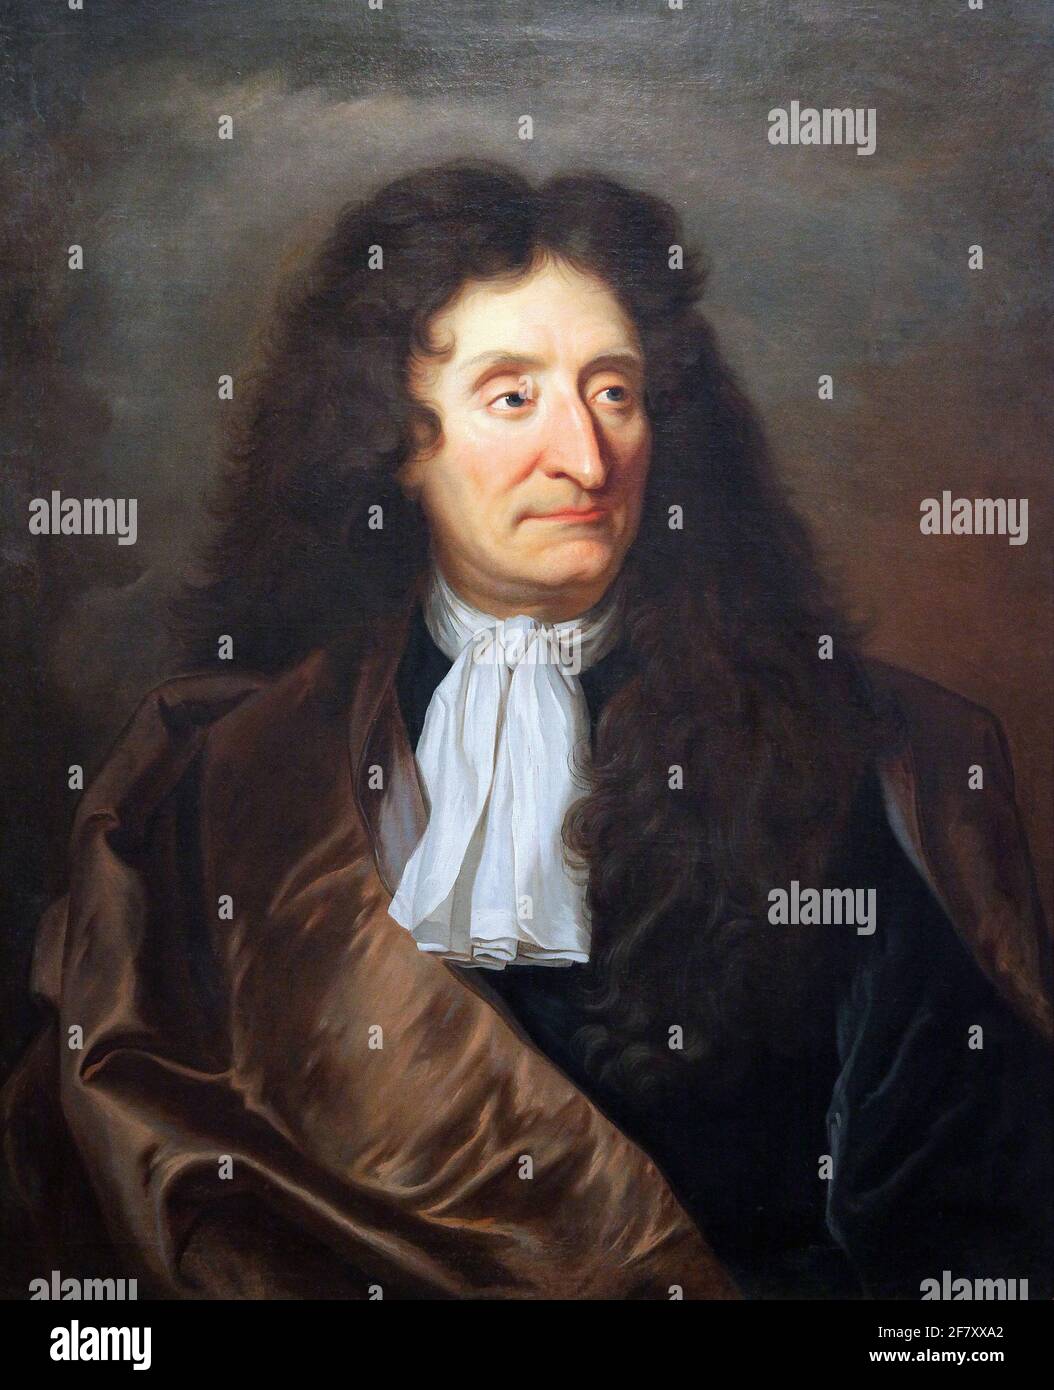 Portrait of fabulist Jean de la Fontaine 1690 by Jacint Rigau ros i Serra 1659-1743 aka Hyacinthe Rigaud.Catalan baroque painter most famous for his portraits of Louis XIV and other members of the French nobility. Stock Photo